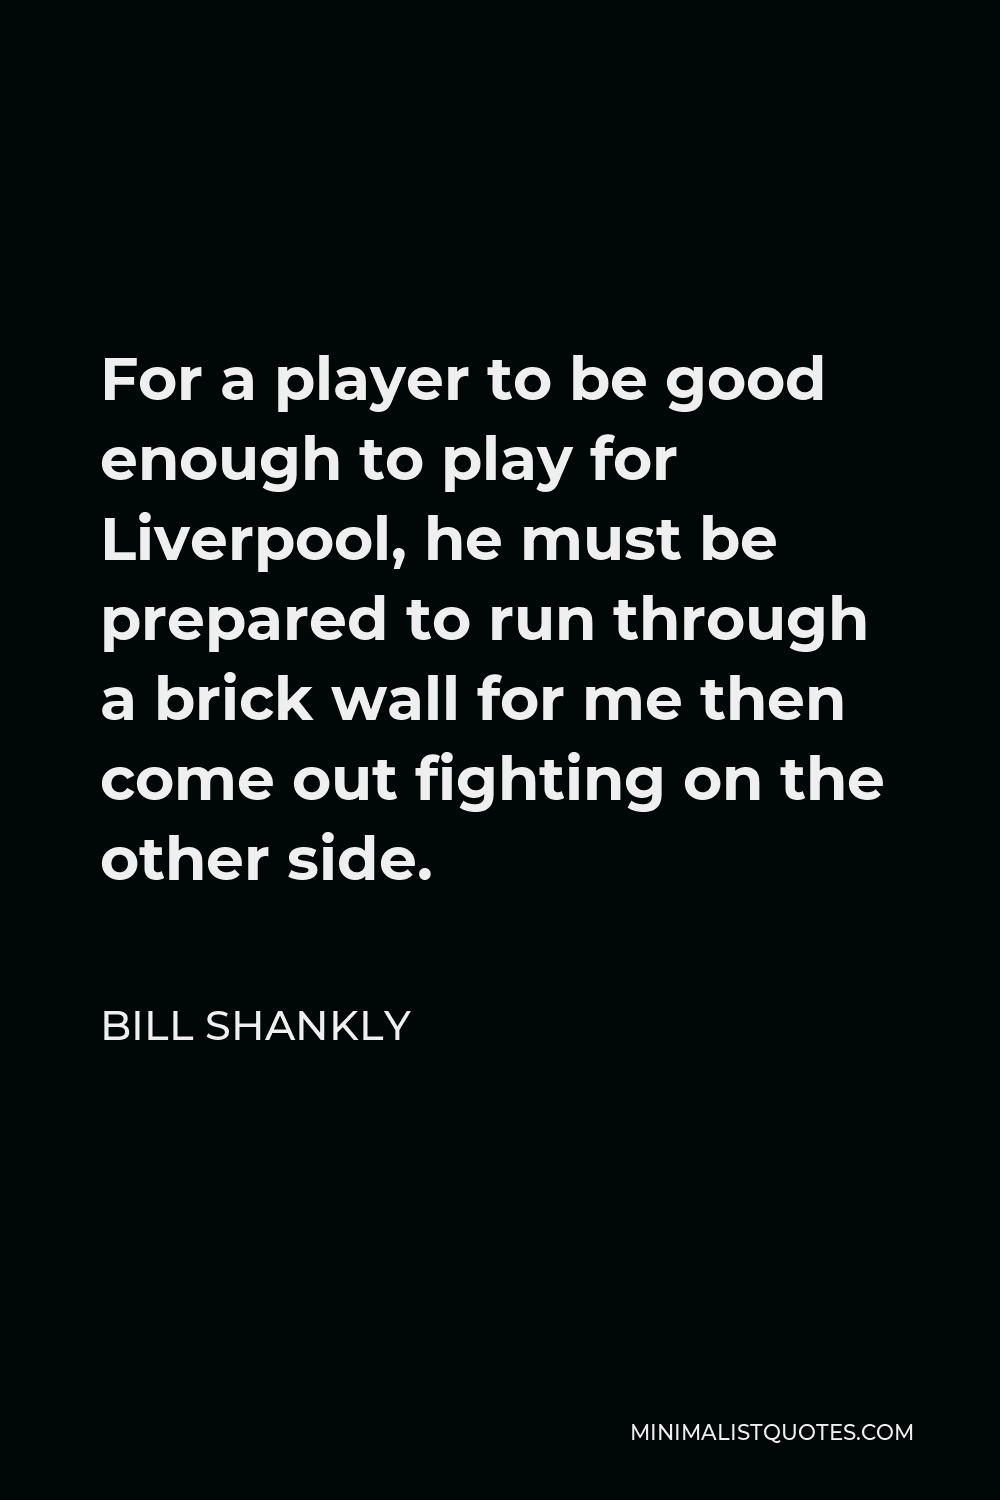 Bill Shankly Quote - For a player to be good enough to play for Liverpool, he must be prepared to run through a brick wall for me then come out fighting on the other side.